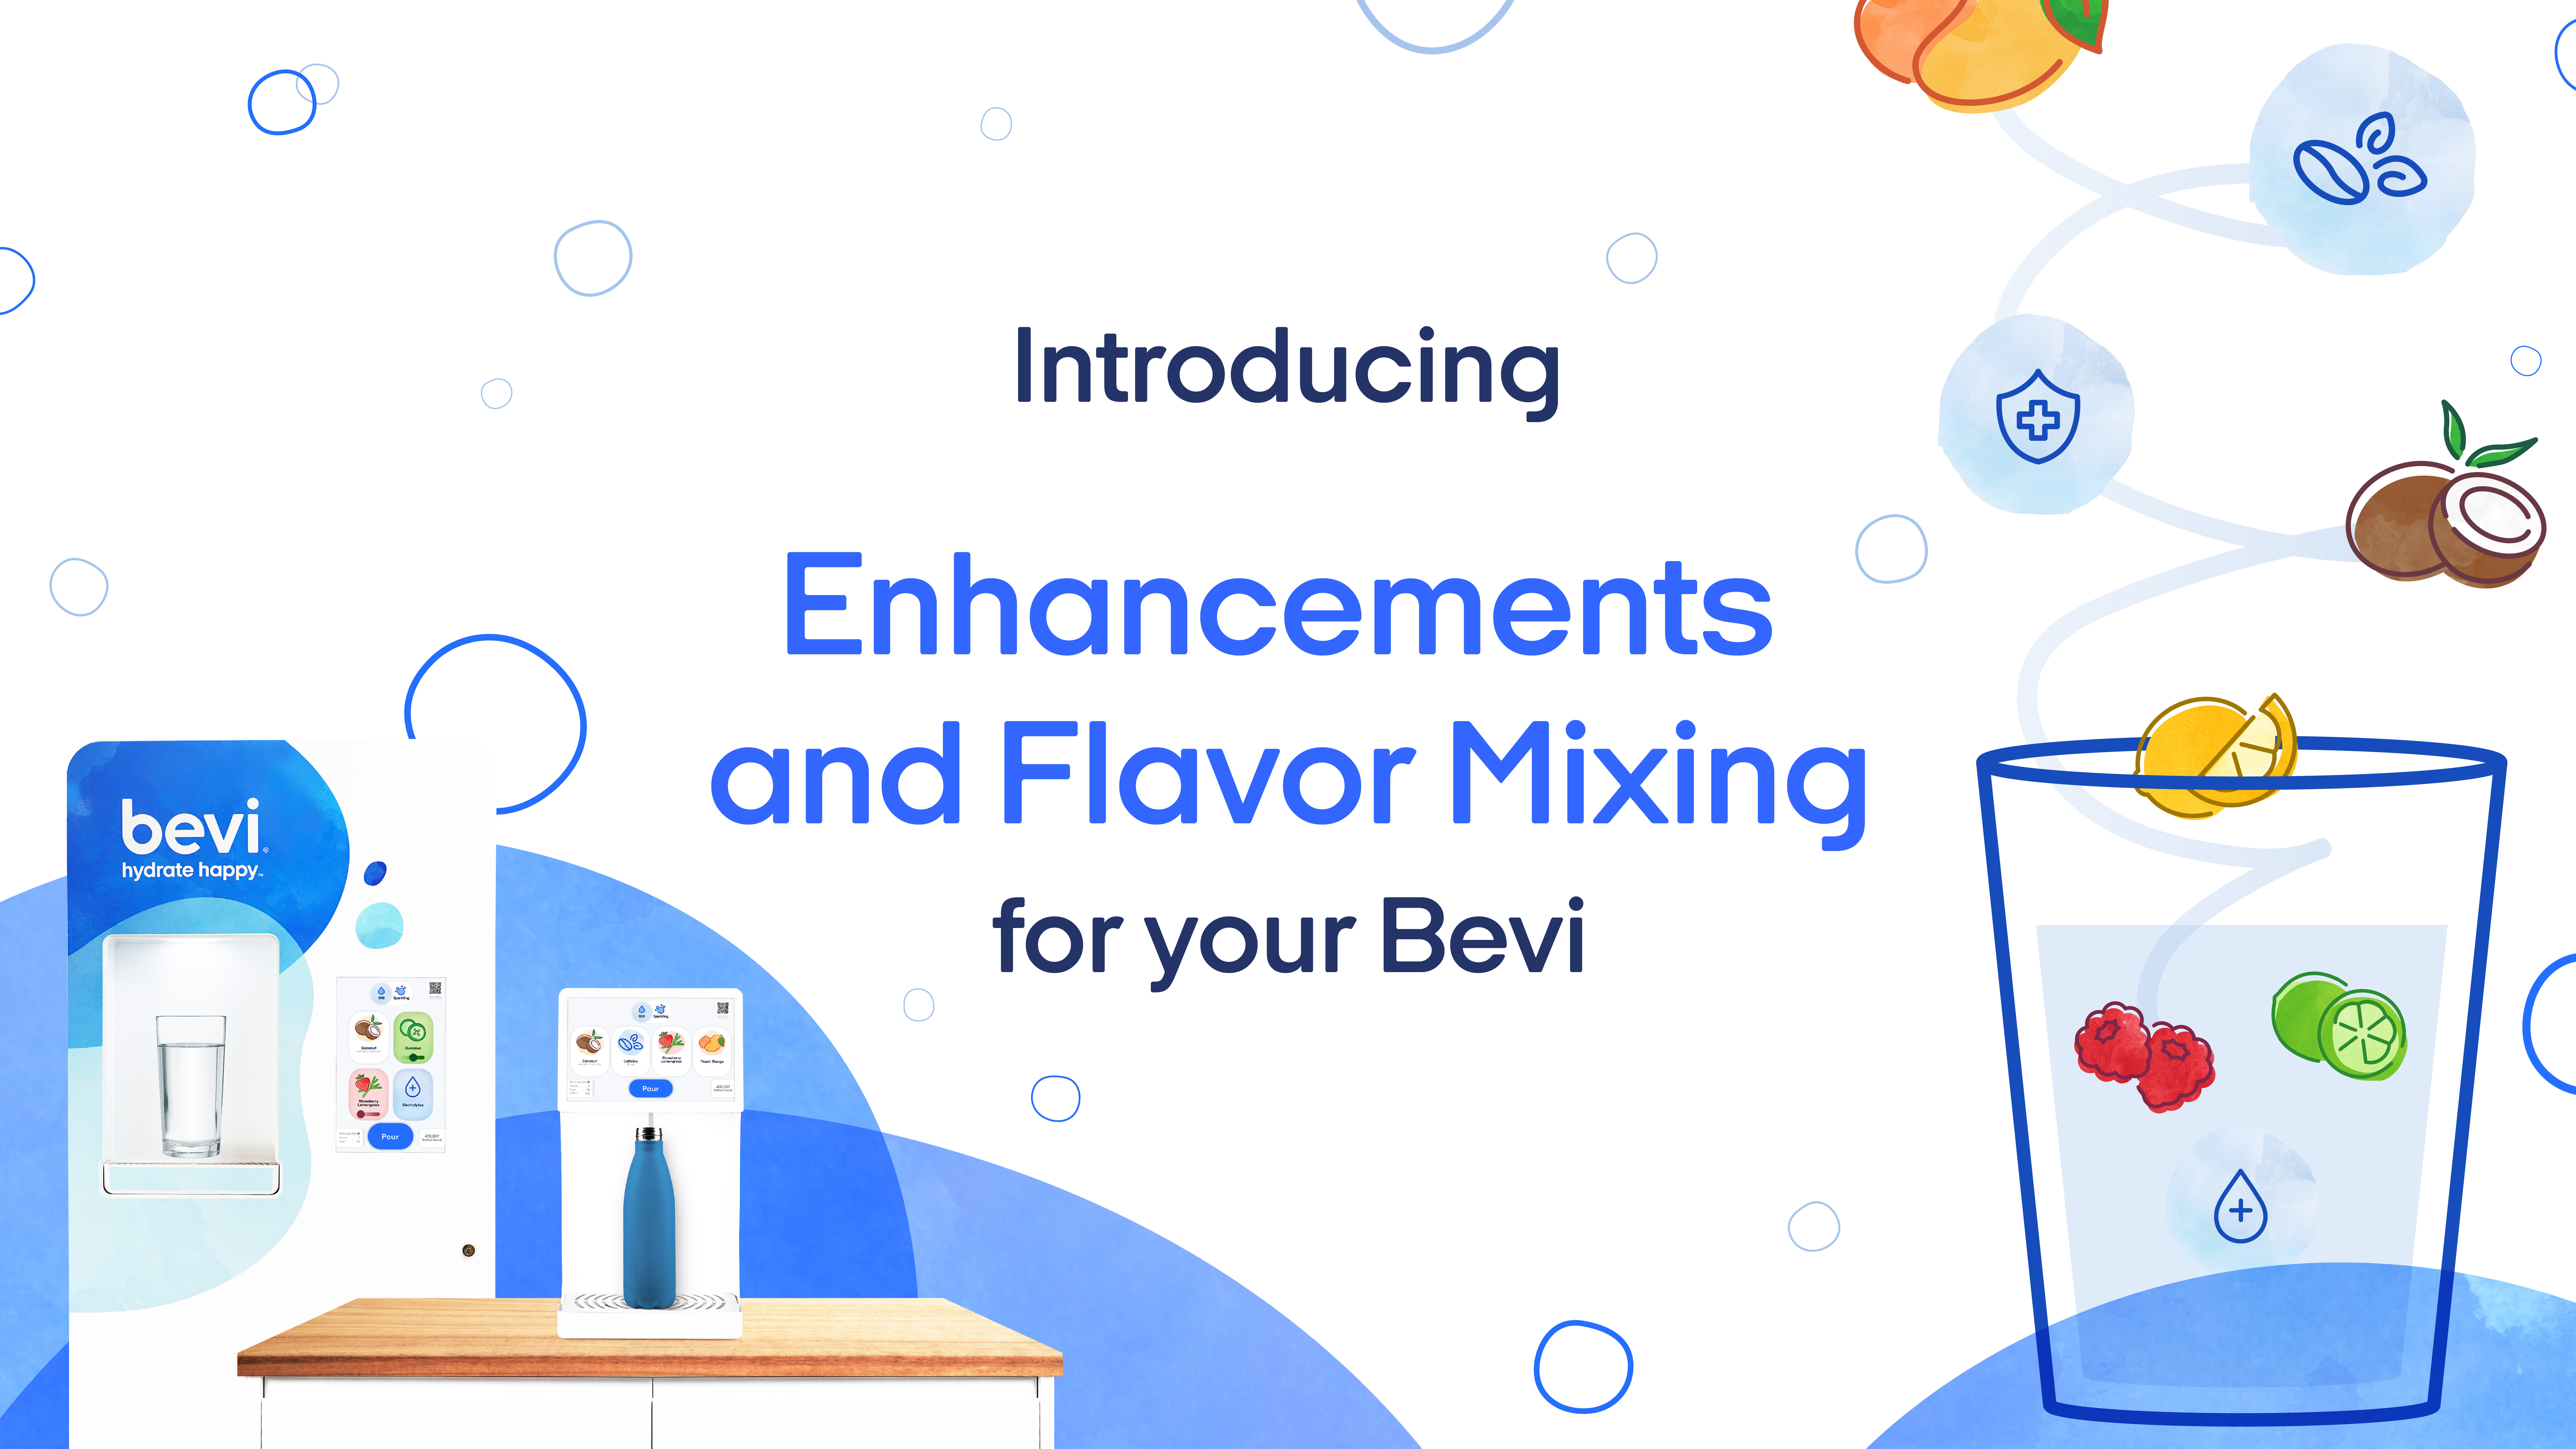 Enhancements and Flavor Mixing Now Available on All Bevi Machines